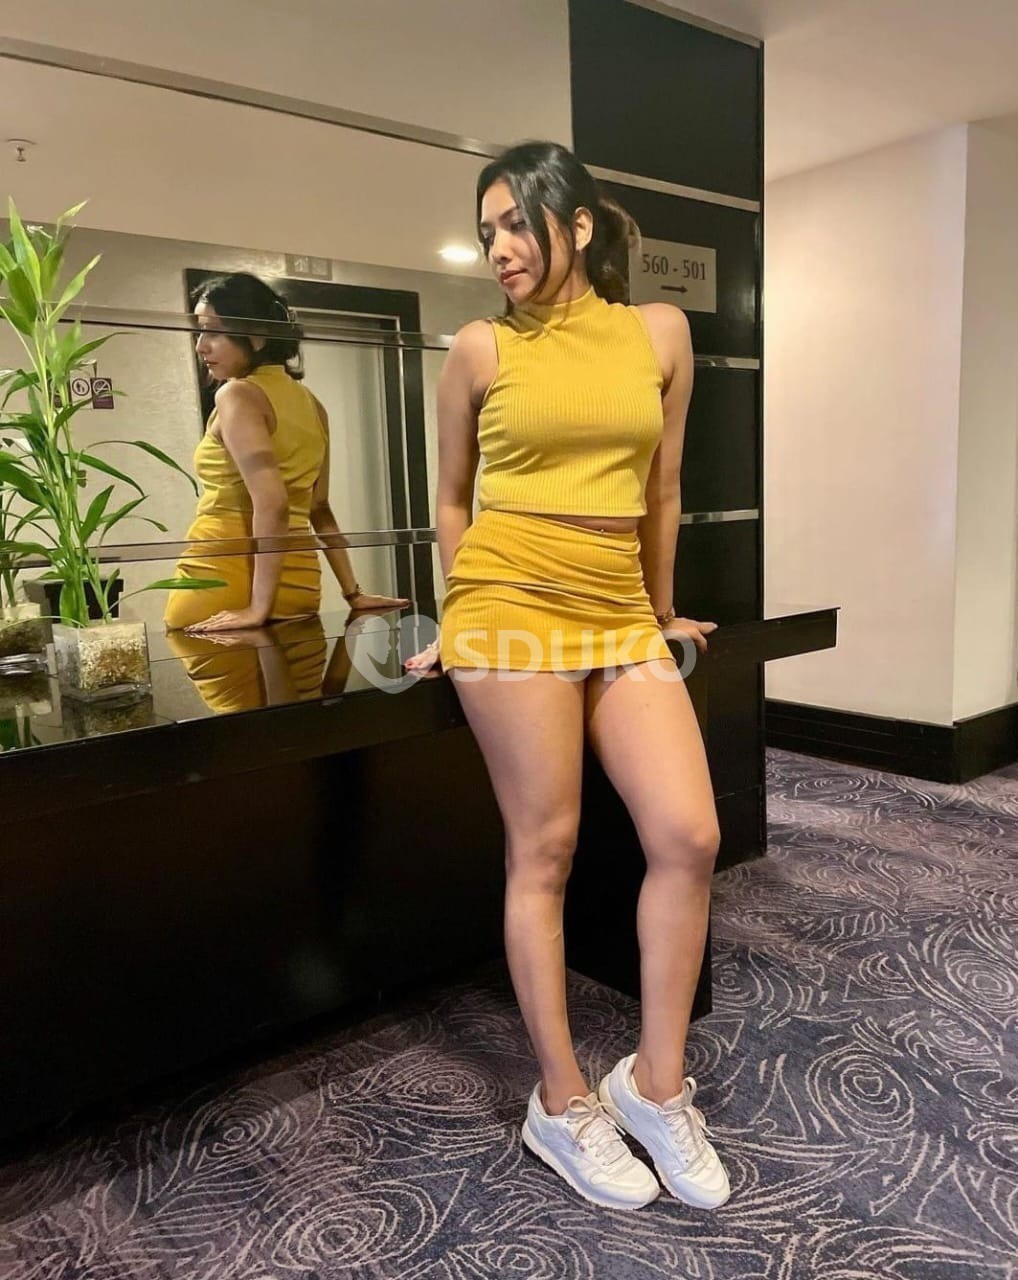 Ambala 👉 Low price 100% genuinely 🔝 sexy vip 👥call girl service available 💯%safe and secure~ 24x7 hour's